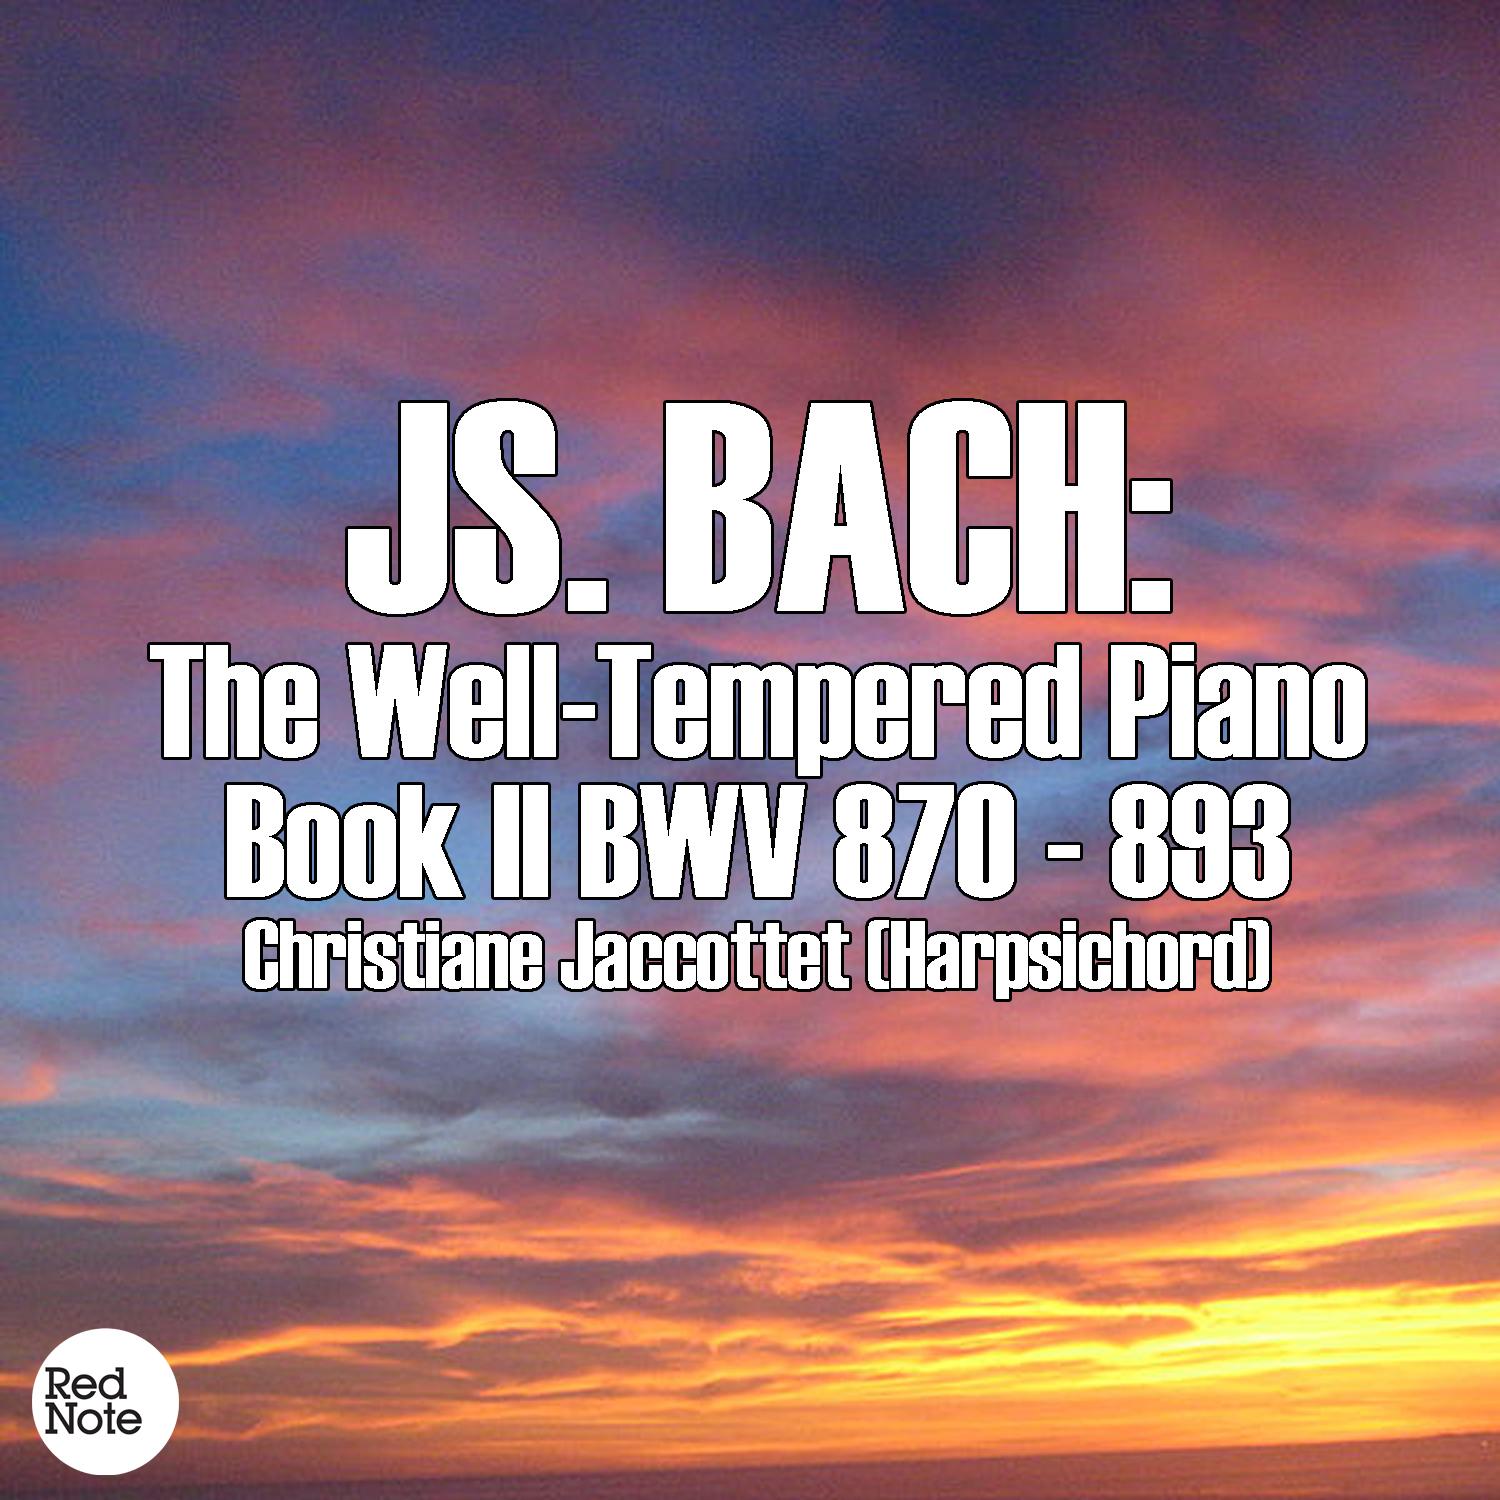 The Well-Tempered Clavier Book 2 in E Flat Major, BWV 876: Prelude and Fugue No. 7